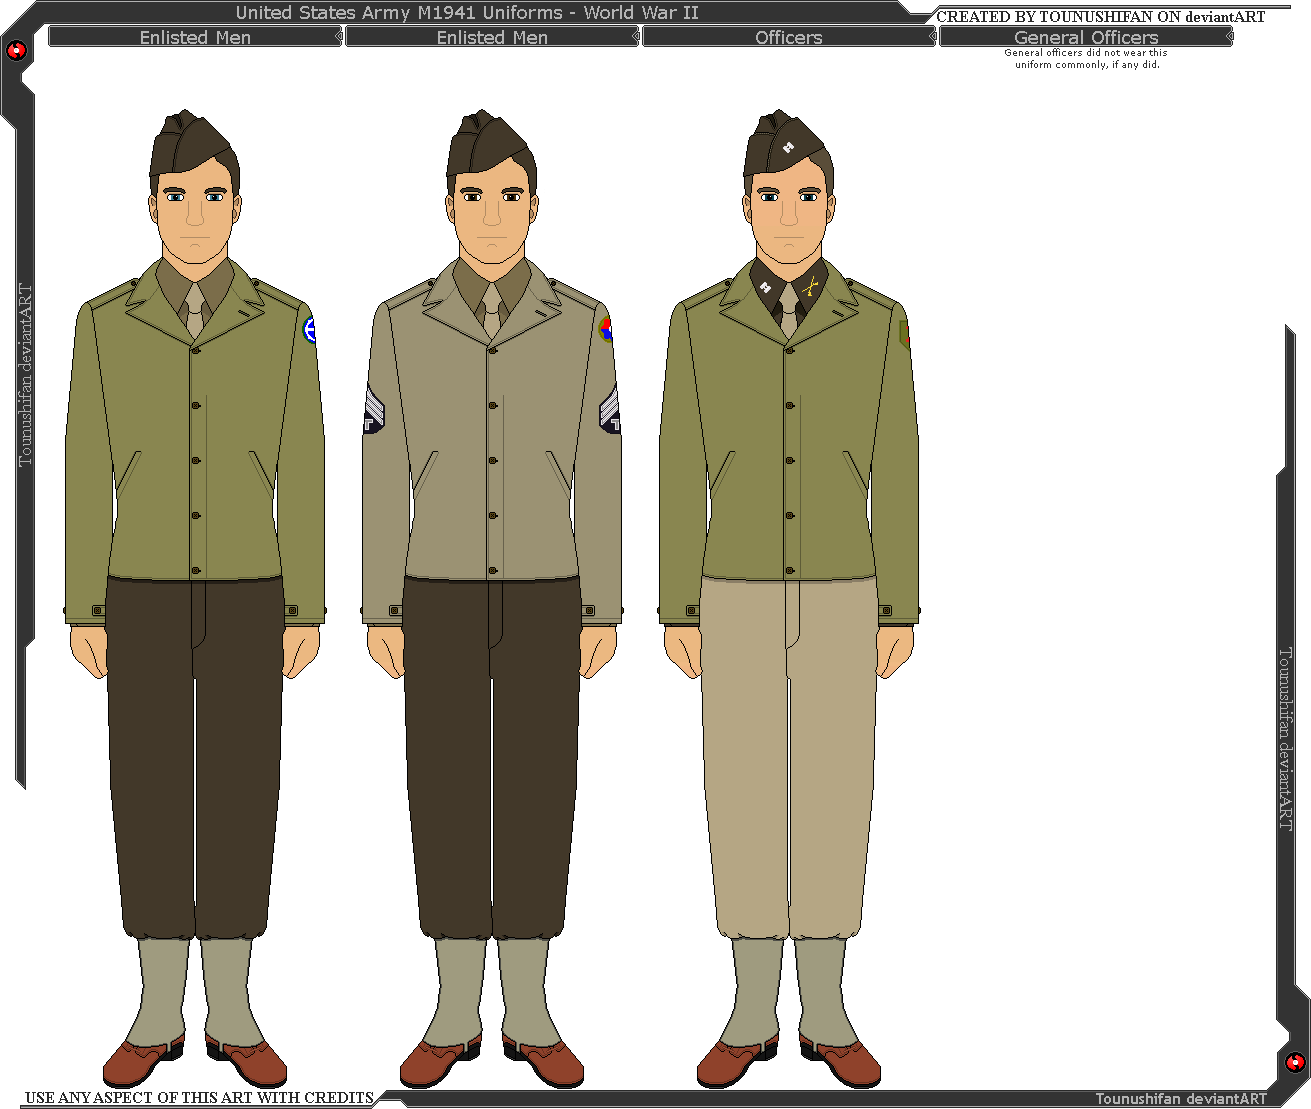 Wwii U.S. Army M1941 Uniforms By Grand-Lobster-King On Deviantart